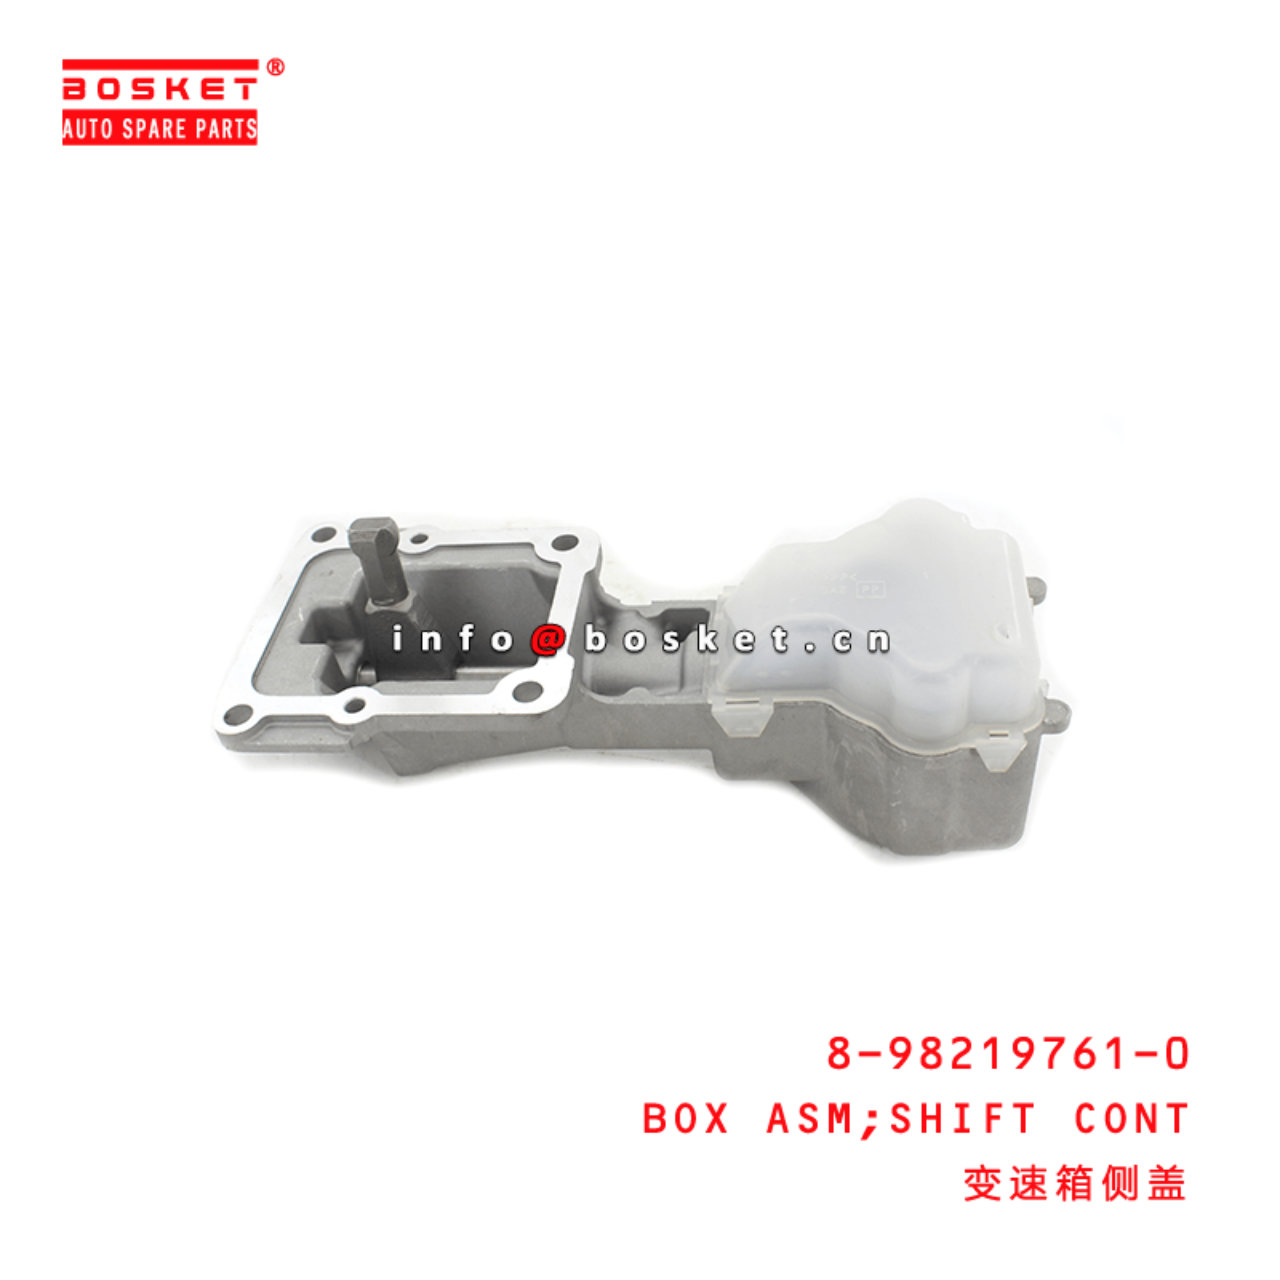 8-98219761-0 Shift Control Box Assembly Suitable for ISUZU D-MAX MU-X 8982197610